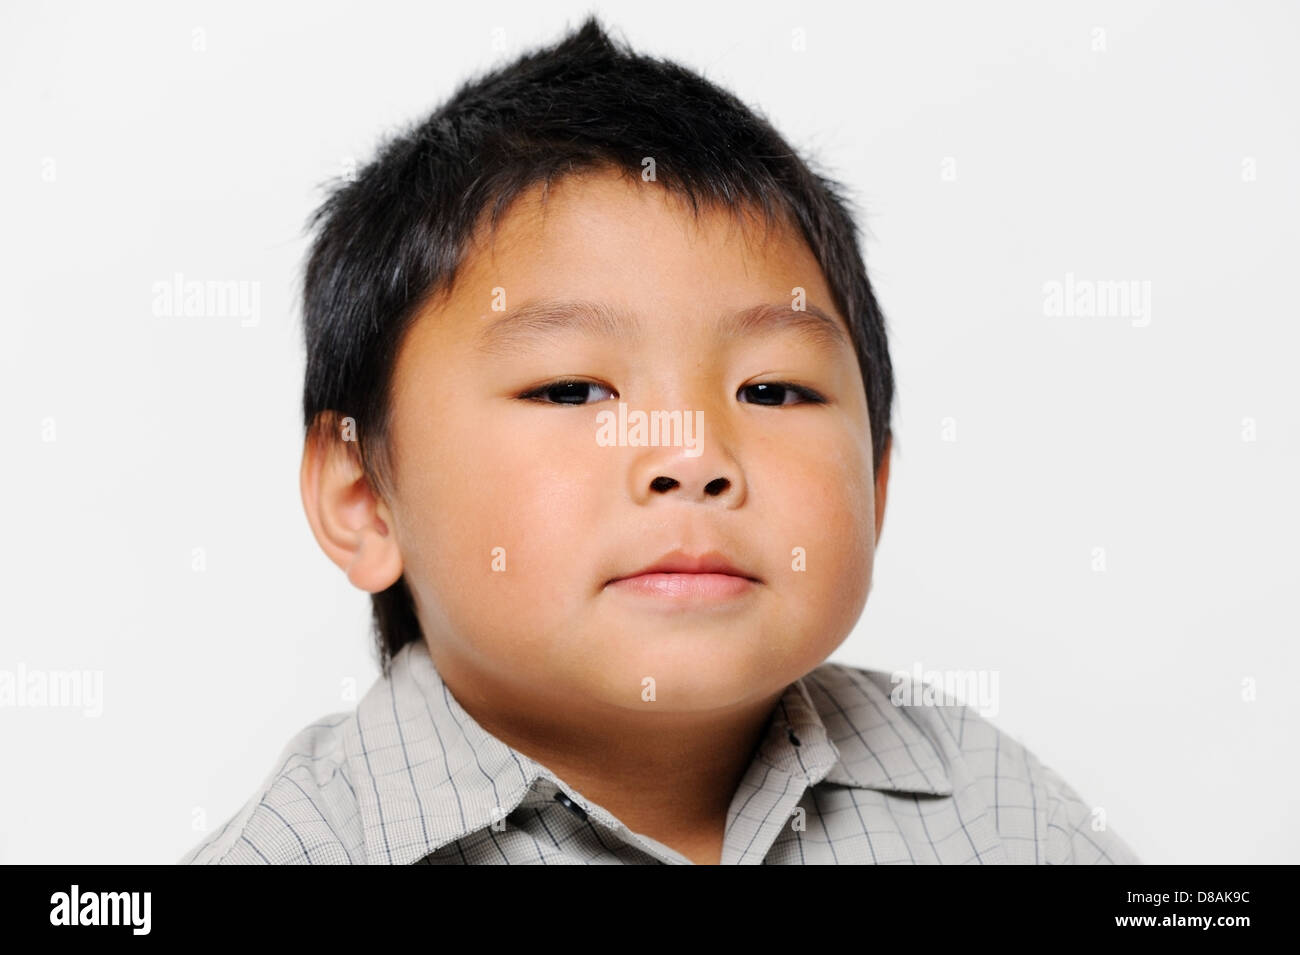 Asian boy with chubby cheeks looks serious Stock Photo